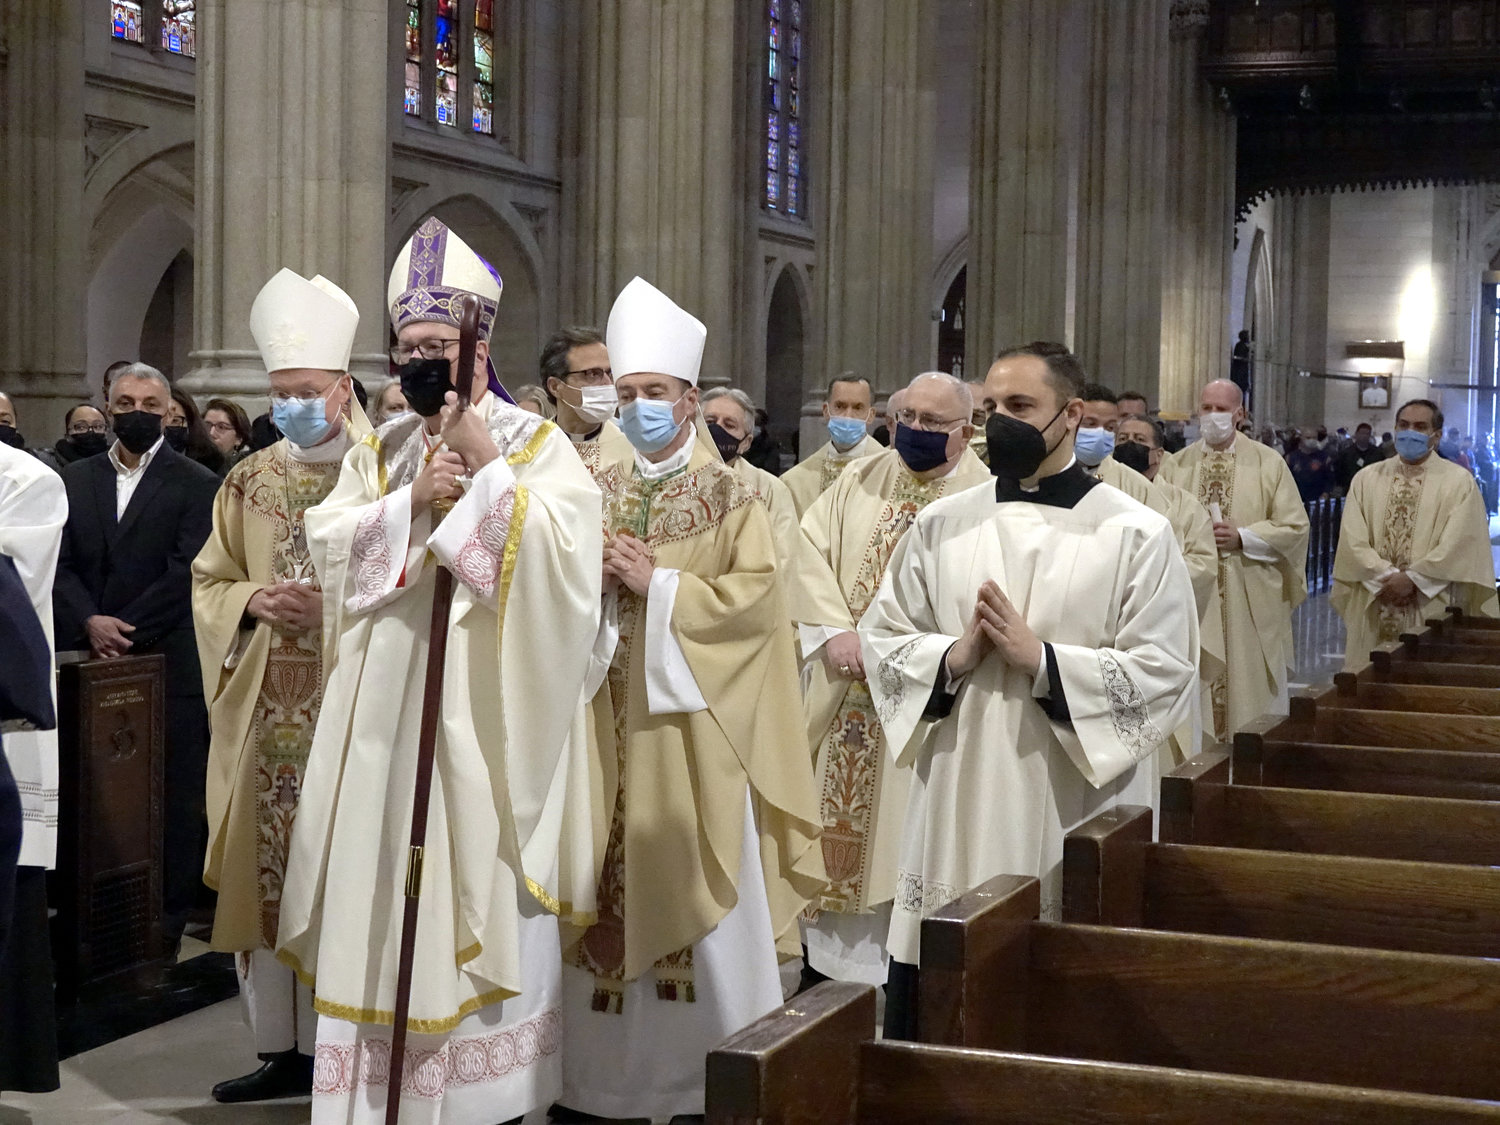 Cardinal Dolan leads a procession of bishops and other clergy members at the Feb. 2 Funeral Mass for Det. Wilbert Mora in St. Patrick’s Cathedral.